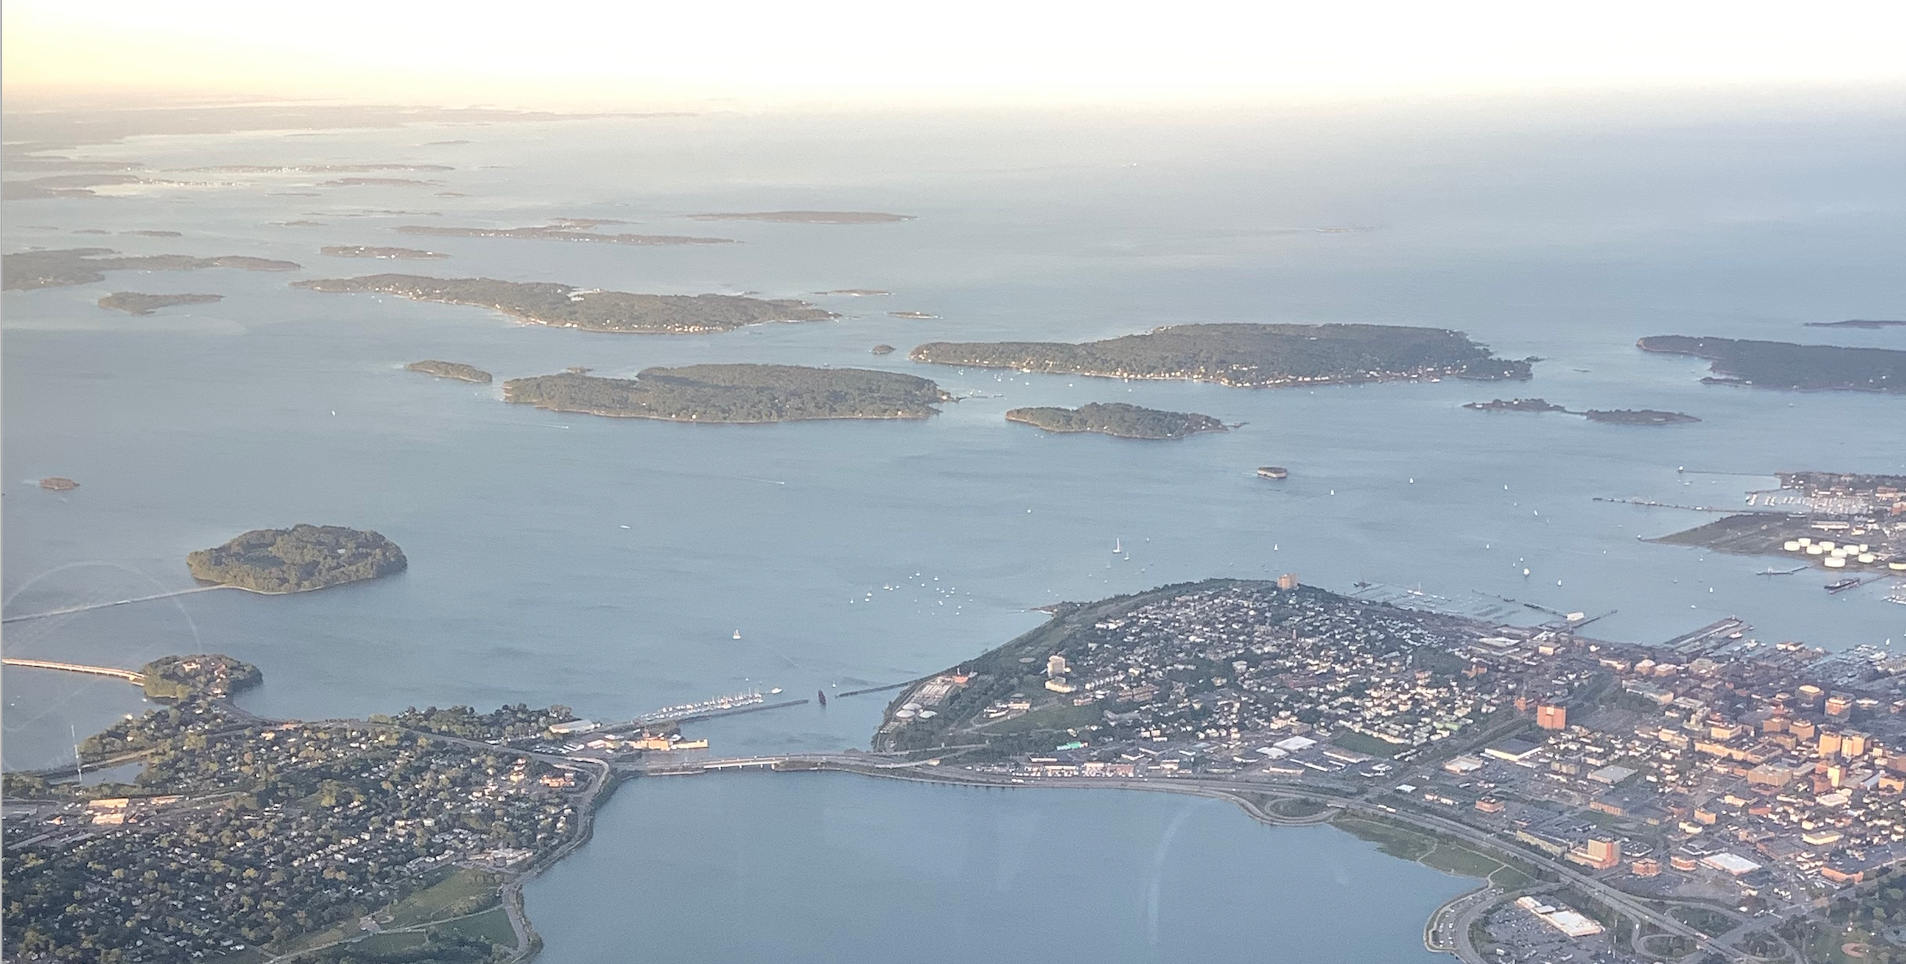 Portland Harbor from The air